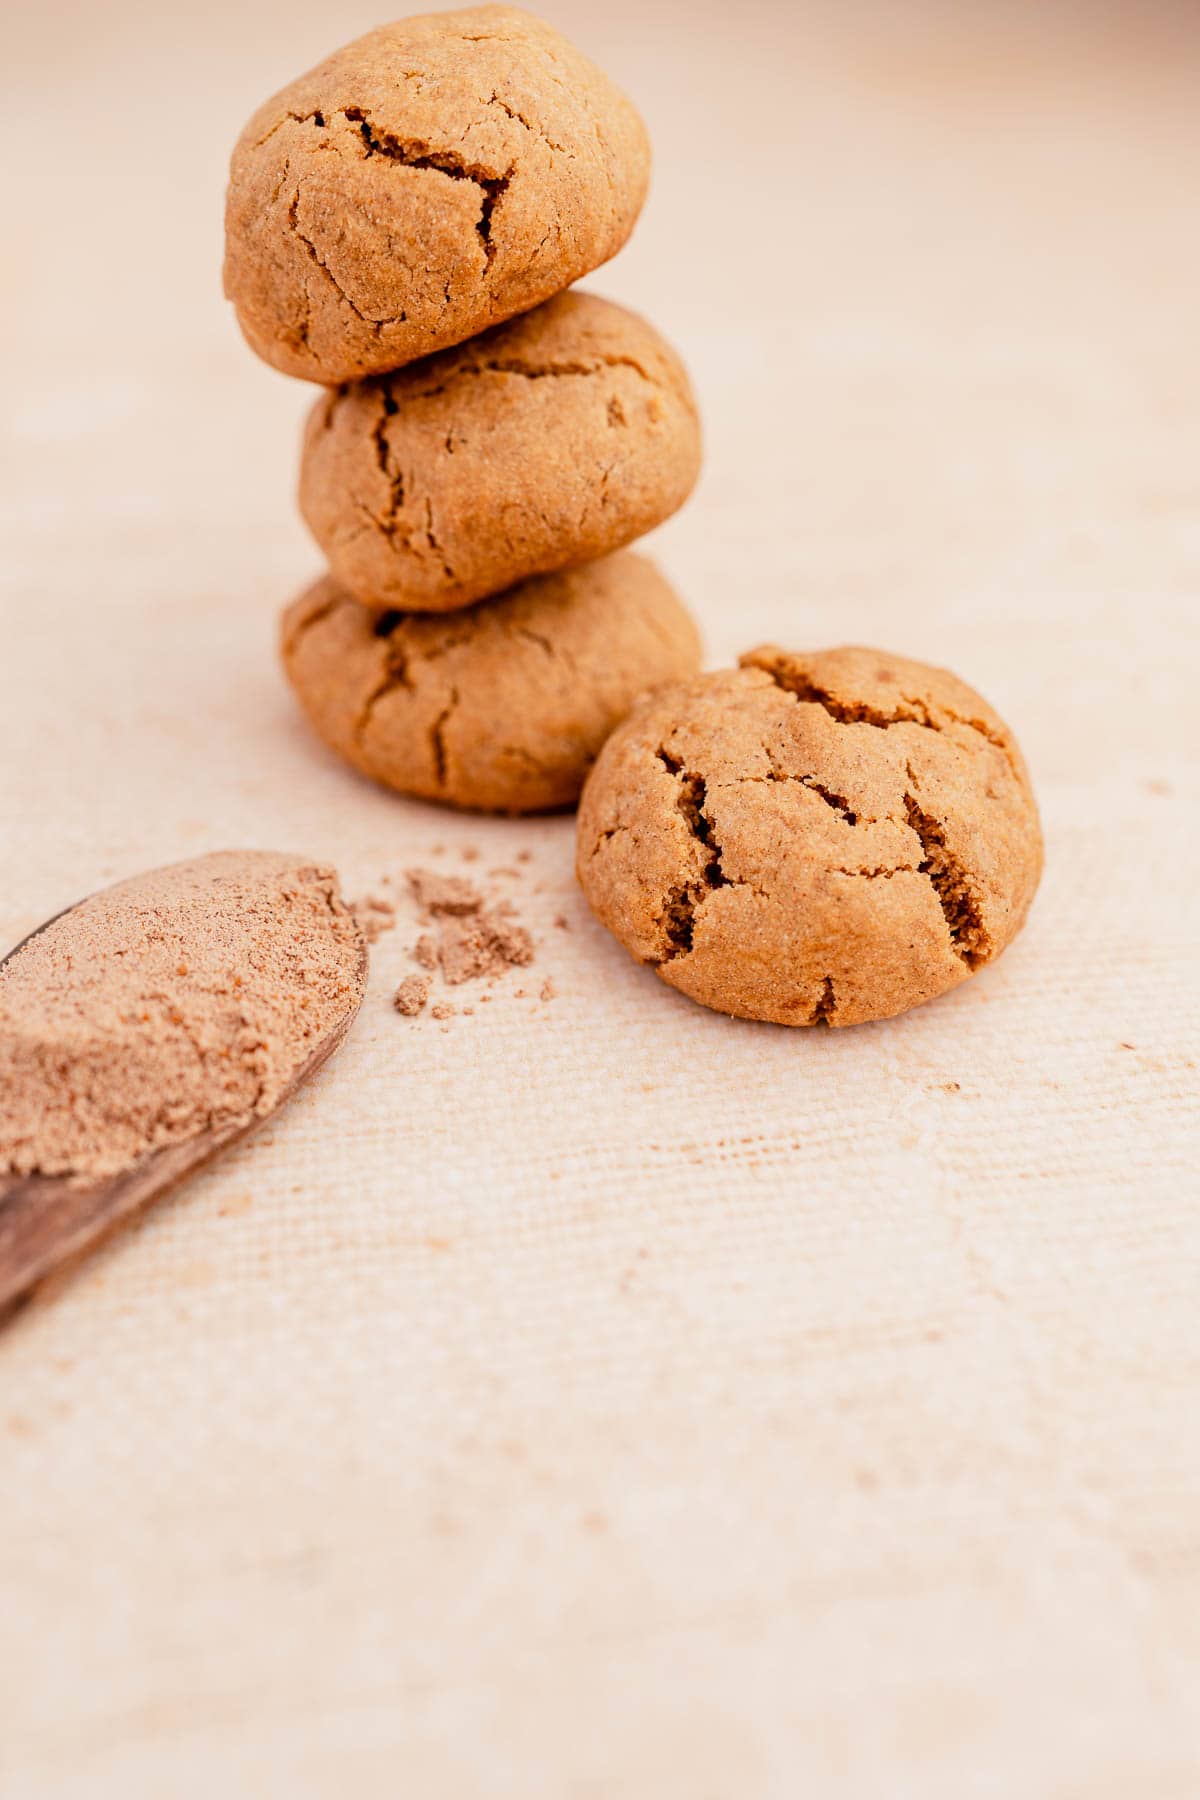 A stack of ginger cookies next to a wooden spoon.